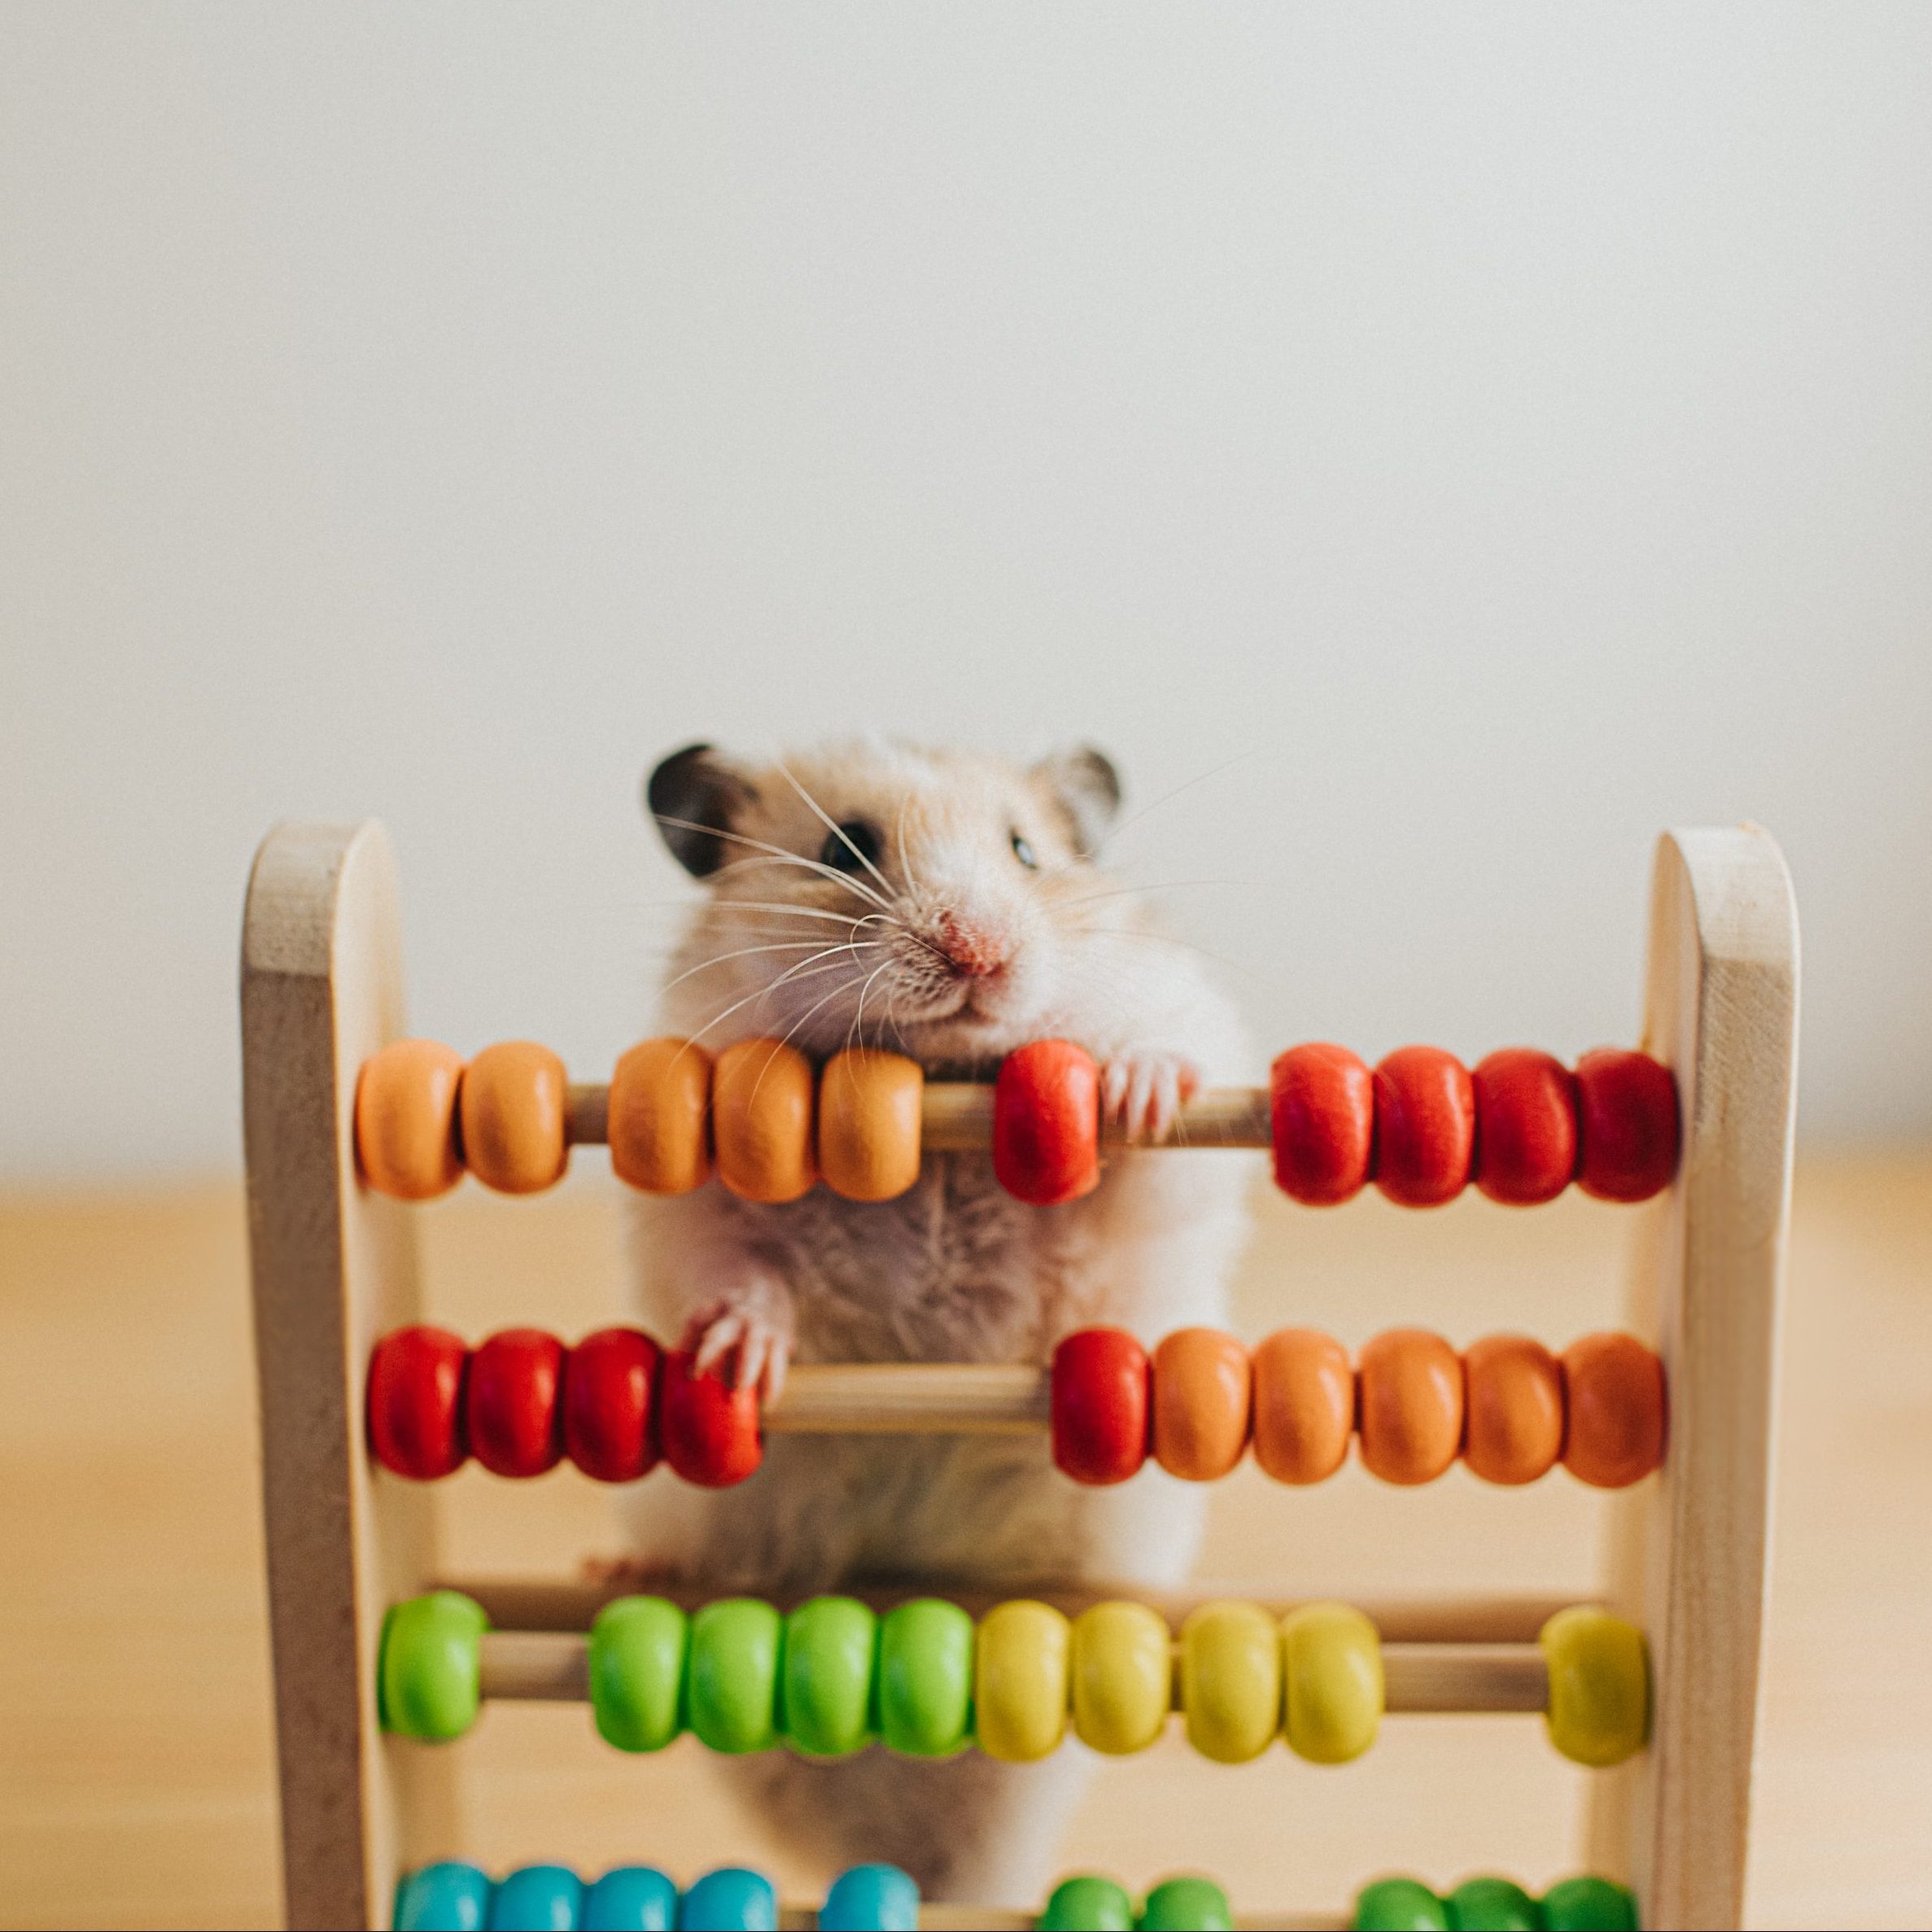 Hamster and an Abacus